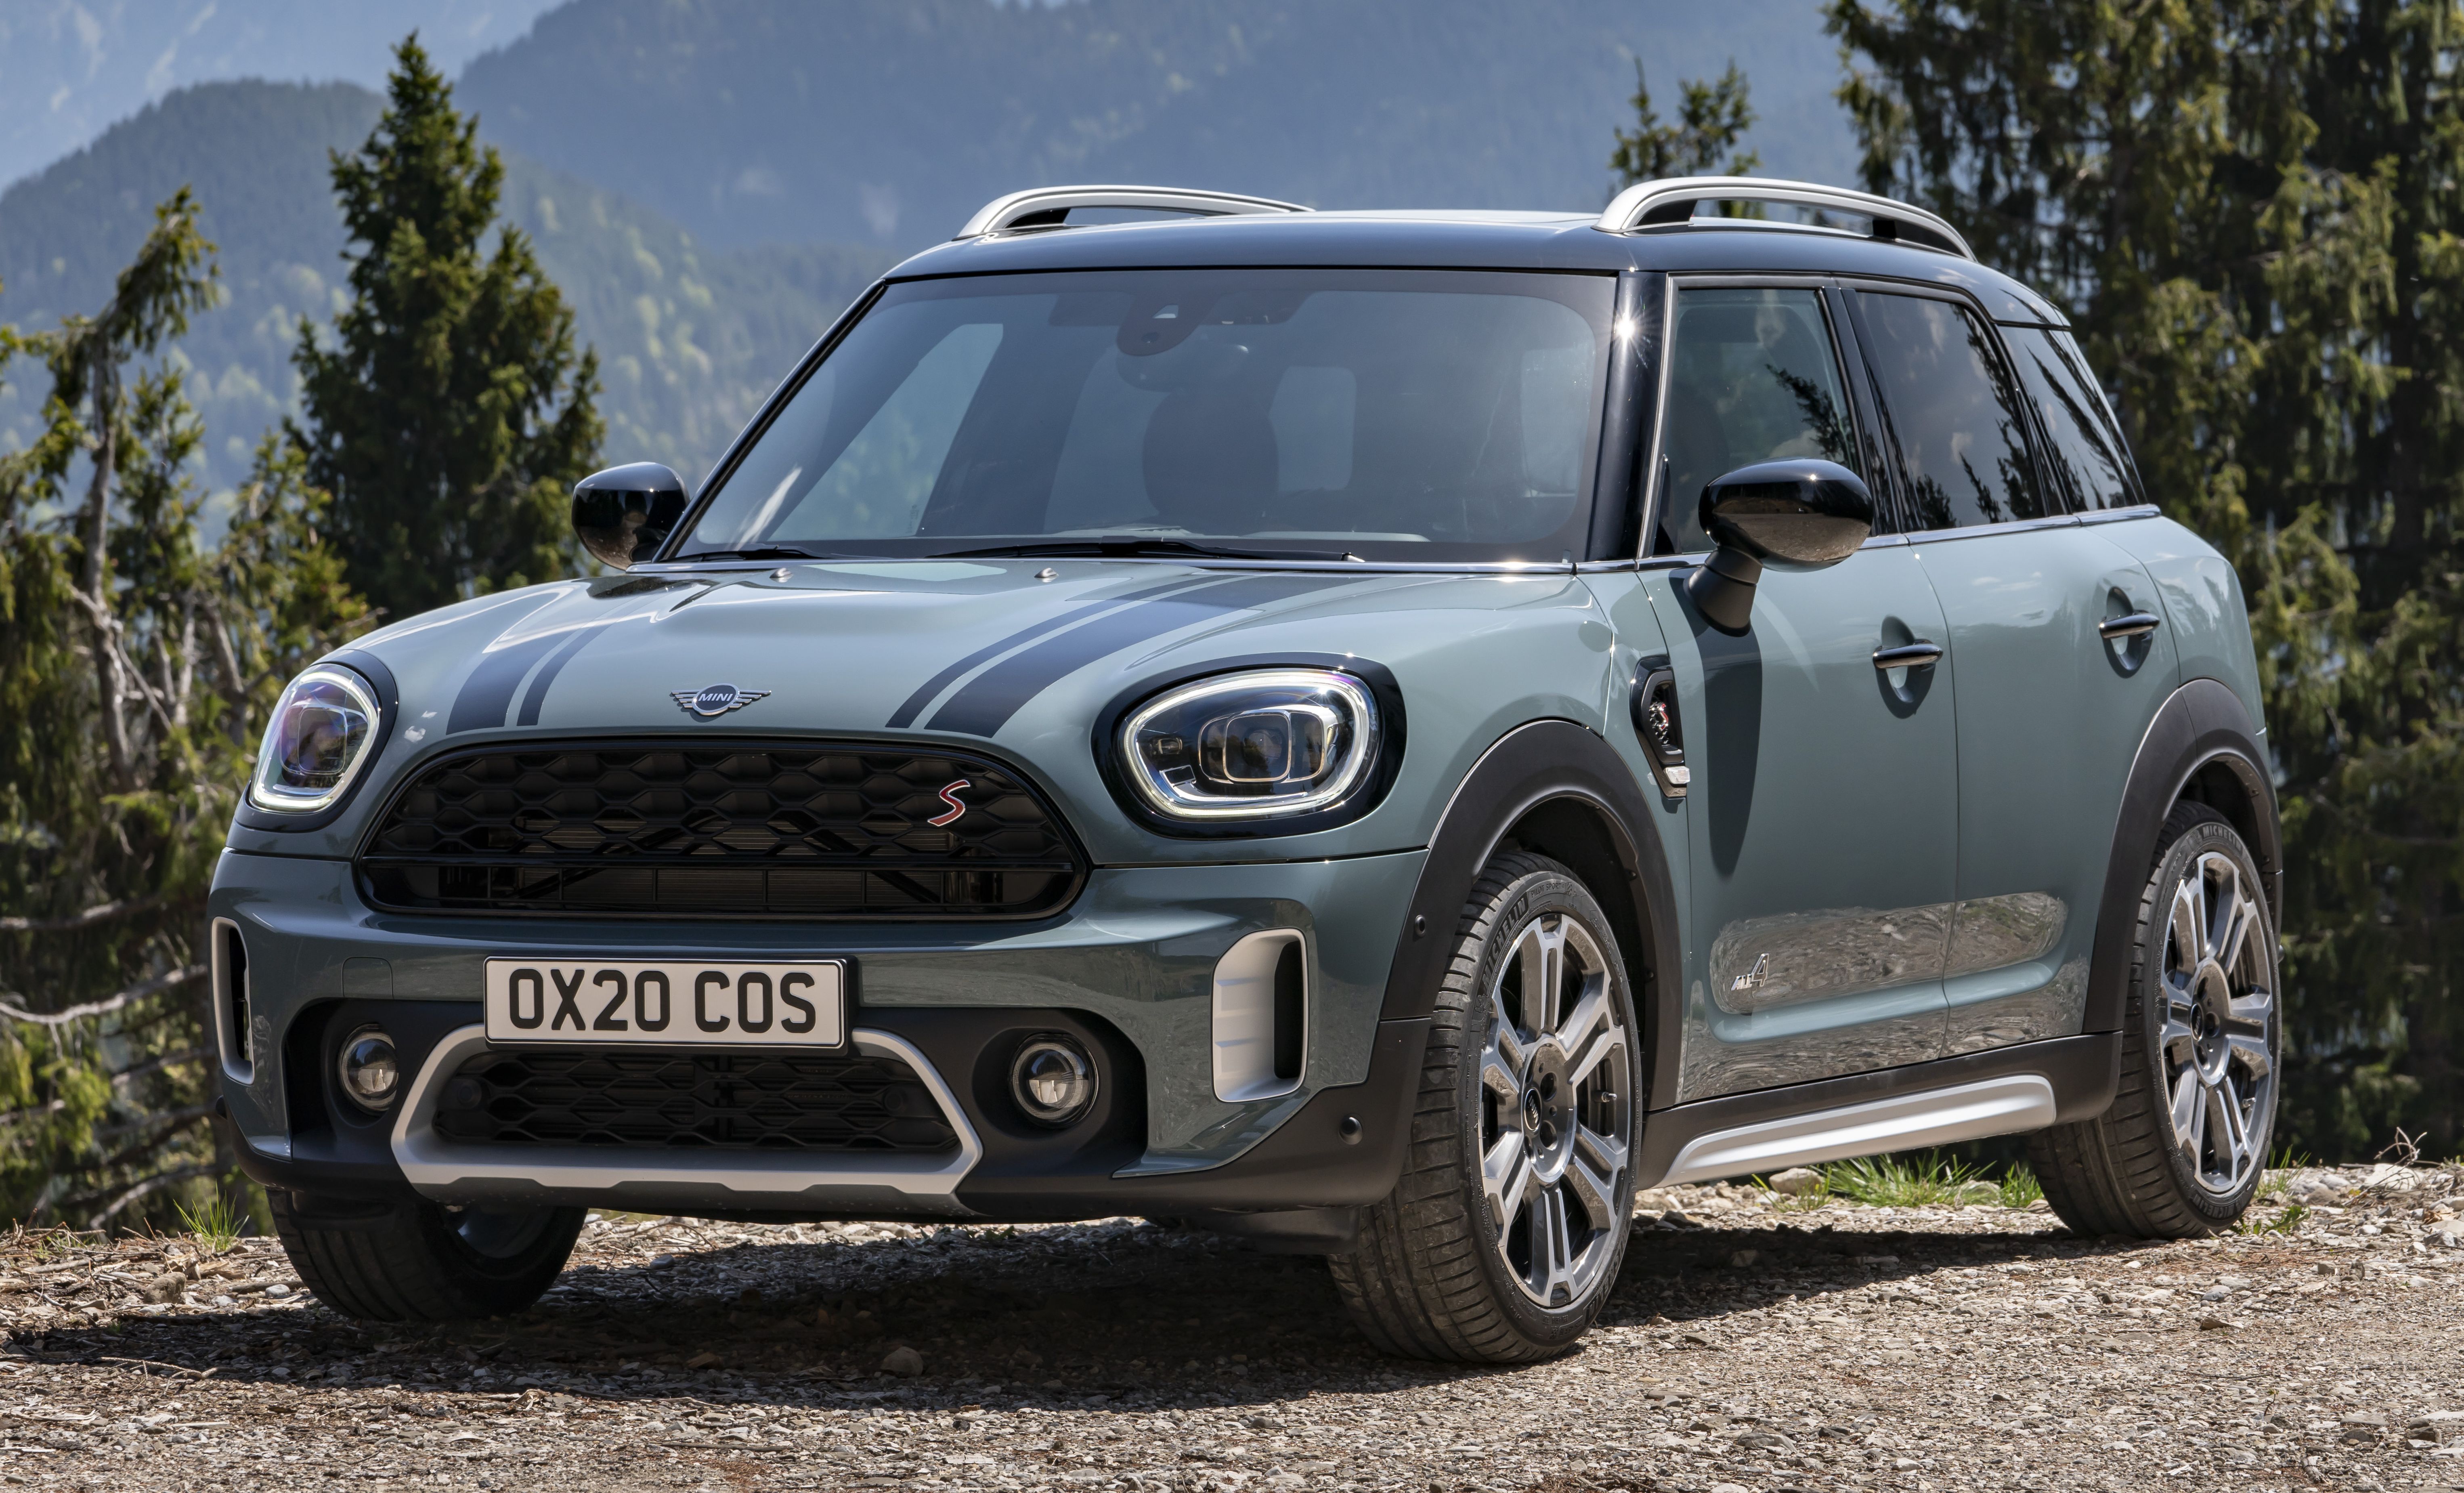 2020 F60 MINI Countryman facelift - cleaner engines, more standard